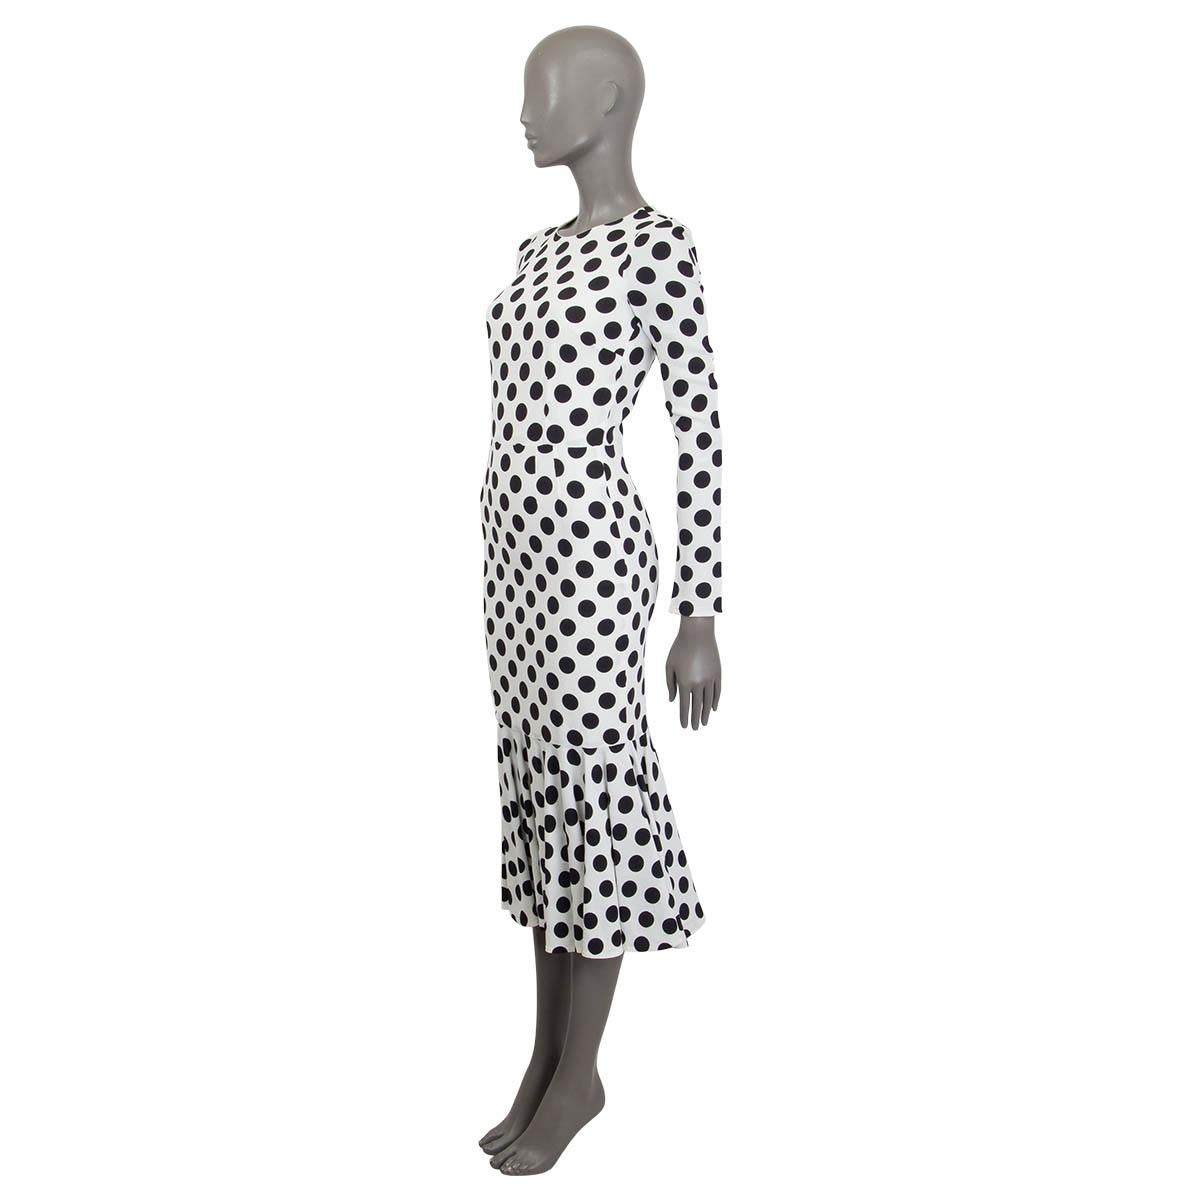 100% authentic Dolce & Gabbana polka dot maxi dress in white and black viscose (100% - please note the content tag is missing). Features a ruffled hemline and long sleeves. Opens with a concealed zipper and a hook at the back. Lined in off-white